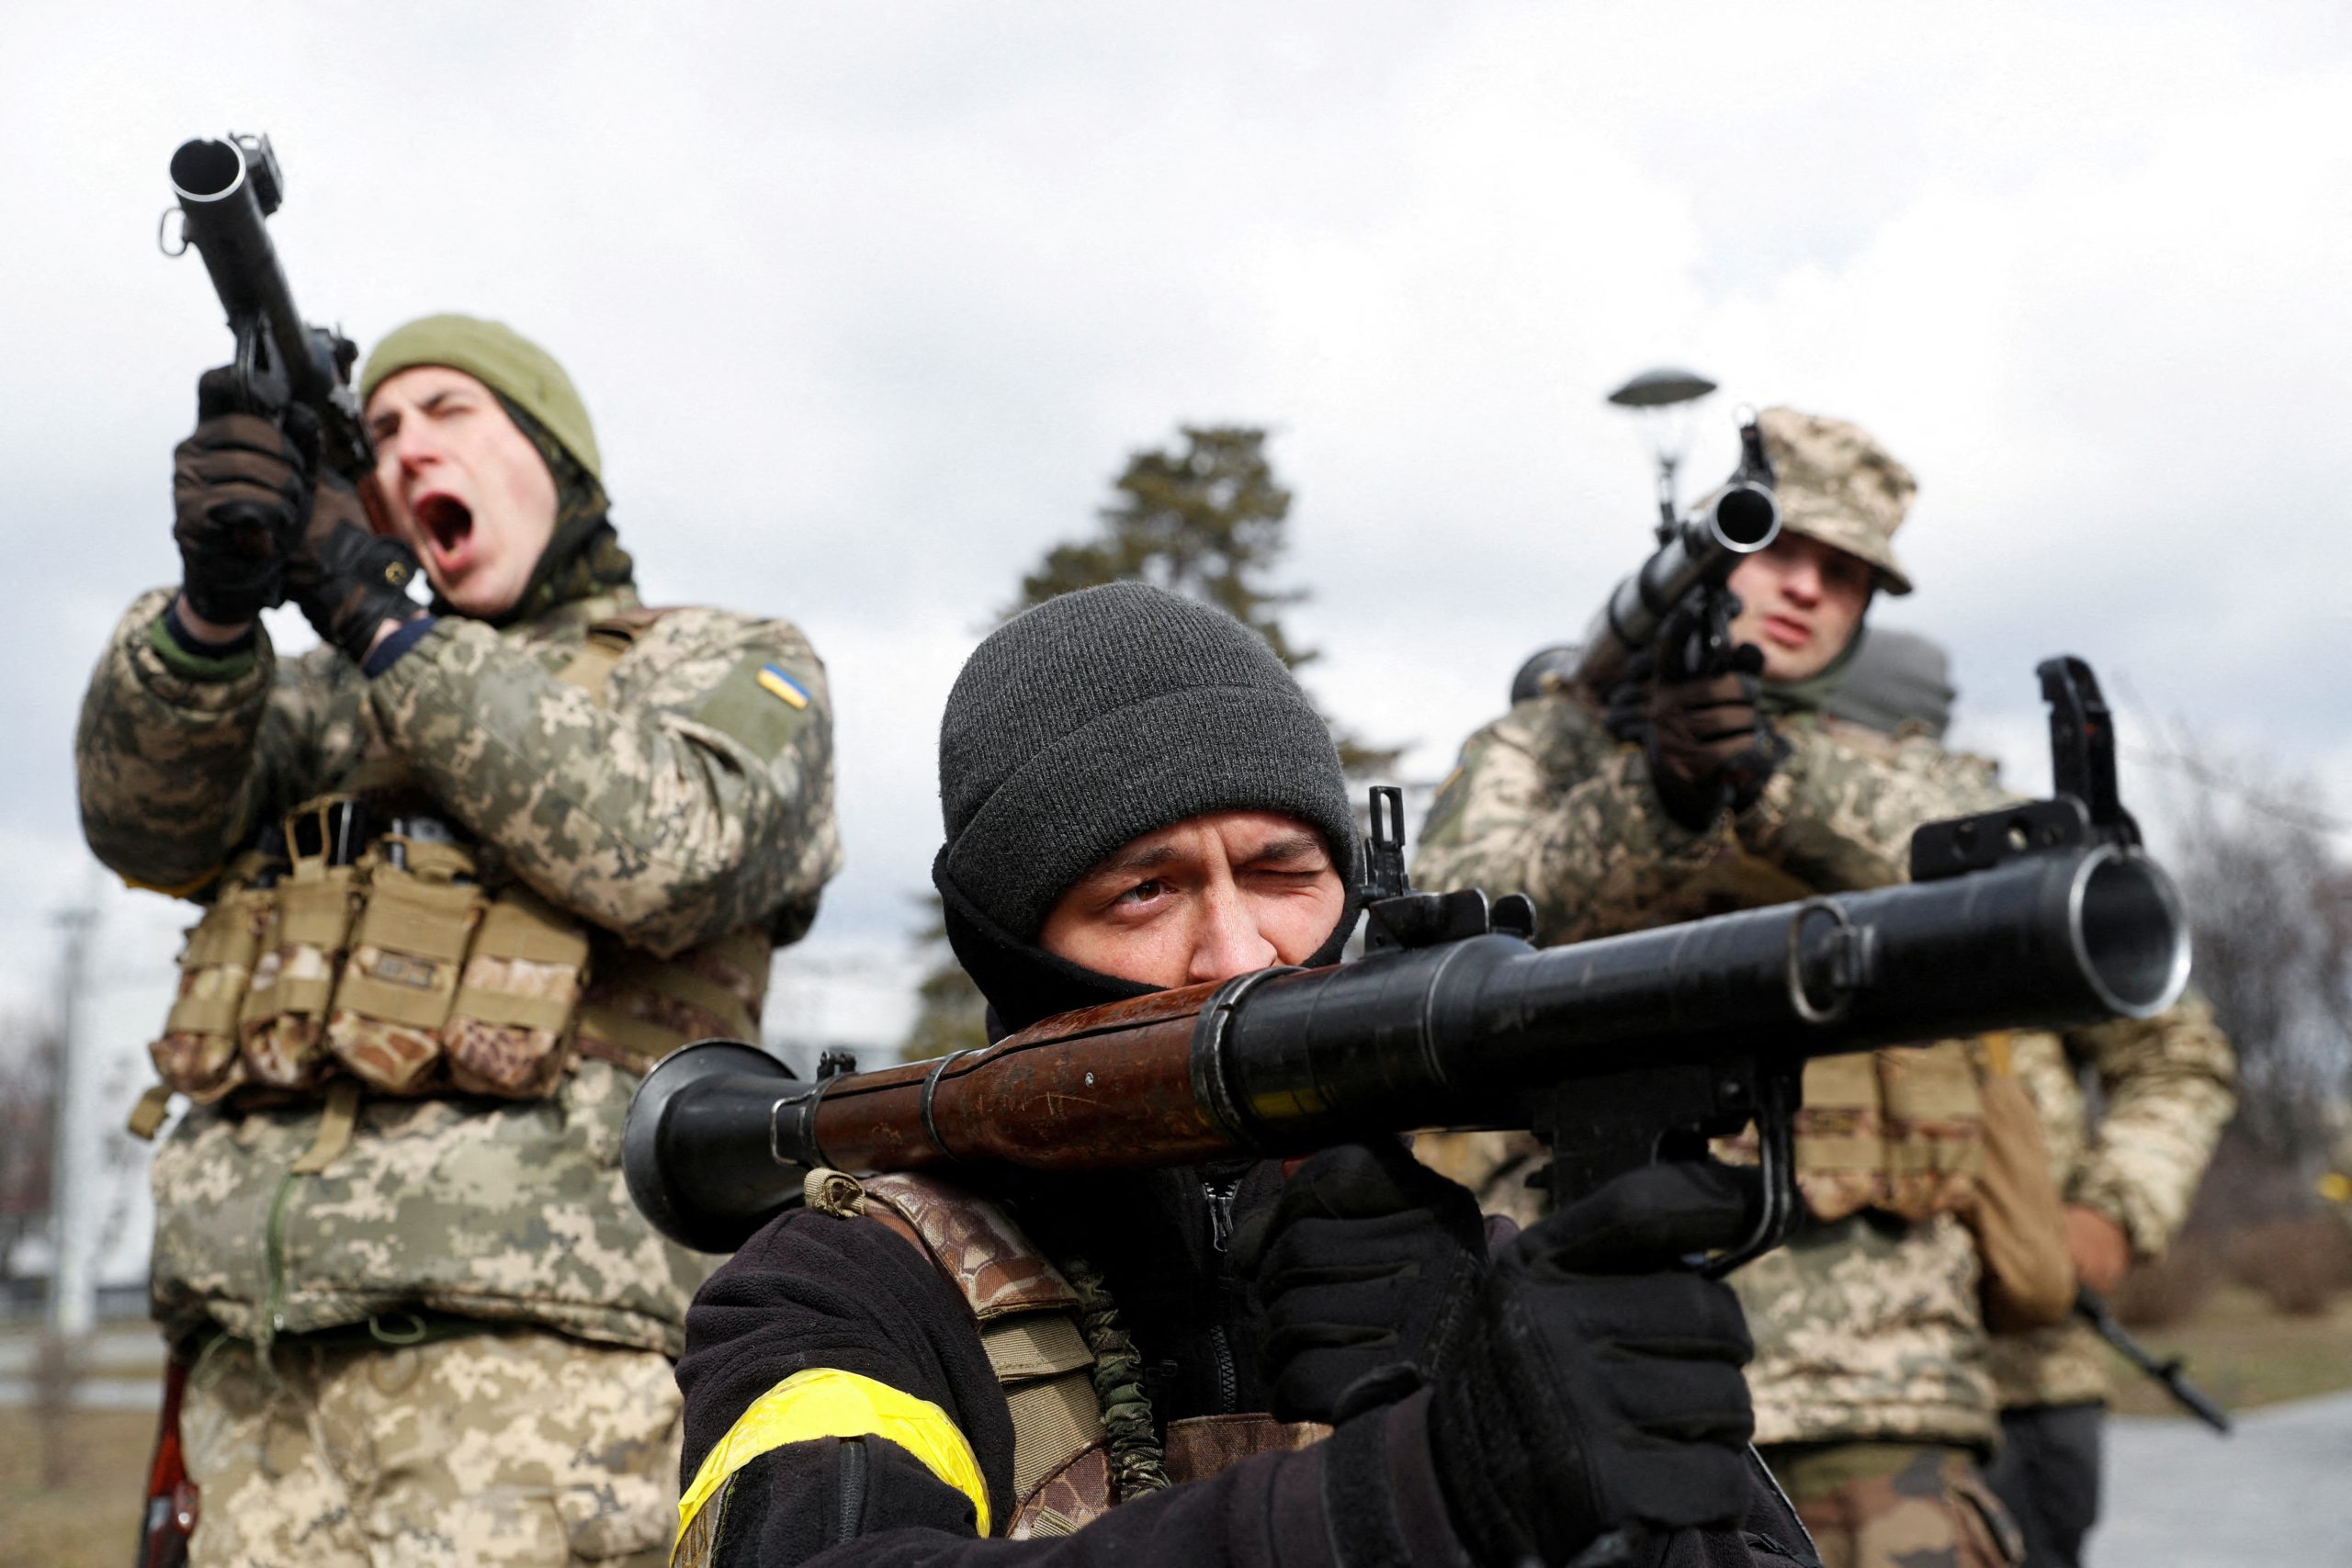 Photos: New members of the Territorial Defence Forces train to operate RPG-7 anti-tank launcher during military exercises amid Russia's invasion of Ukraine, in Kyiv, Ukraine March 9, 2022. Credit: REUTERS/Valentyn Ogirenko.